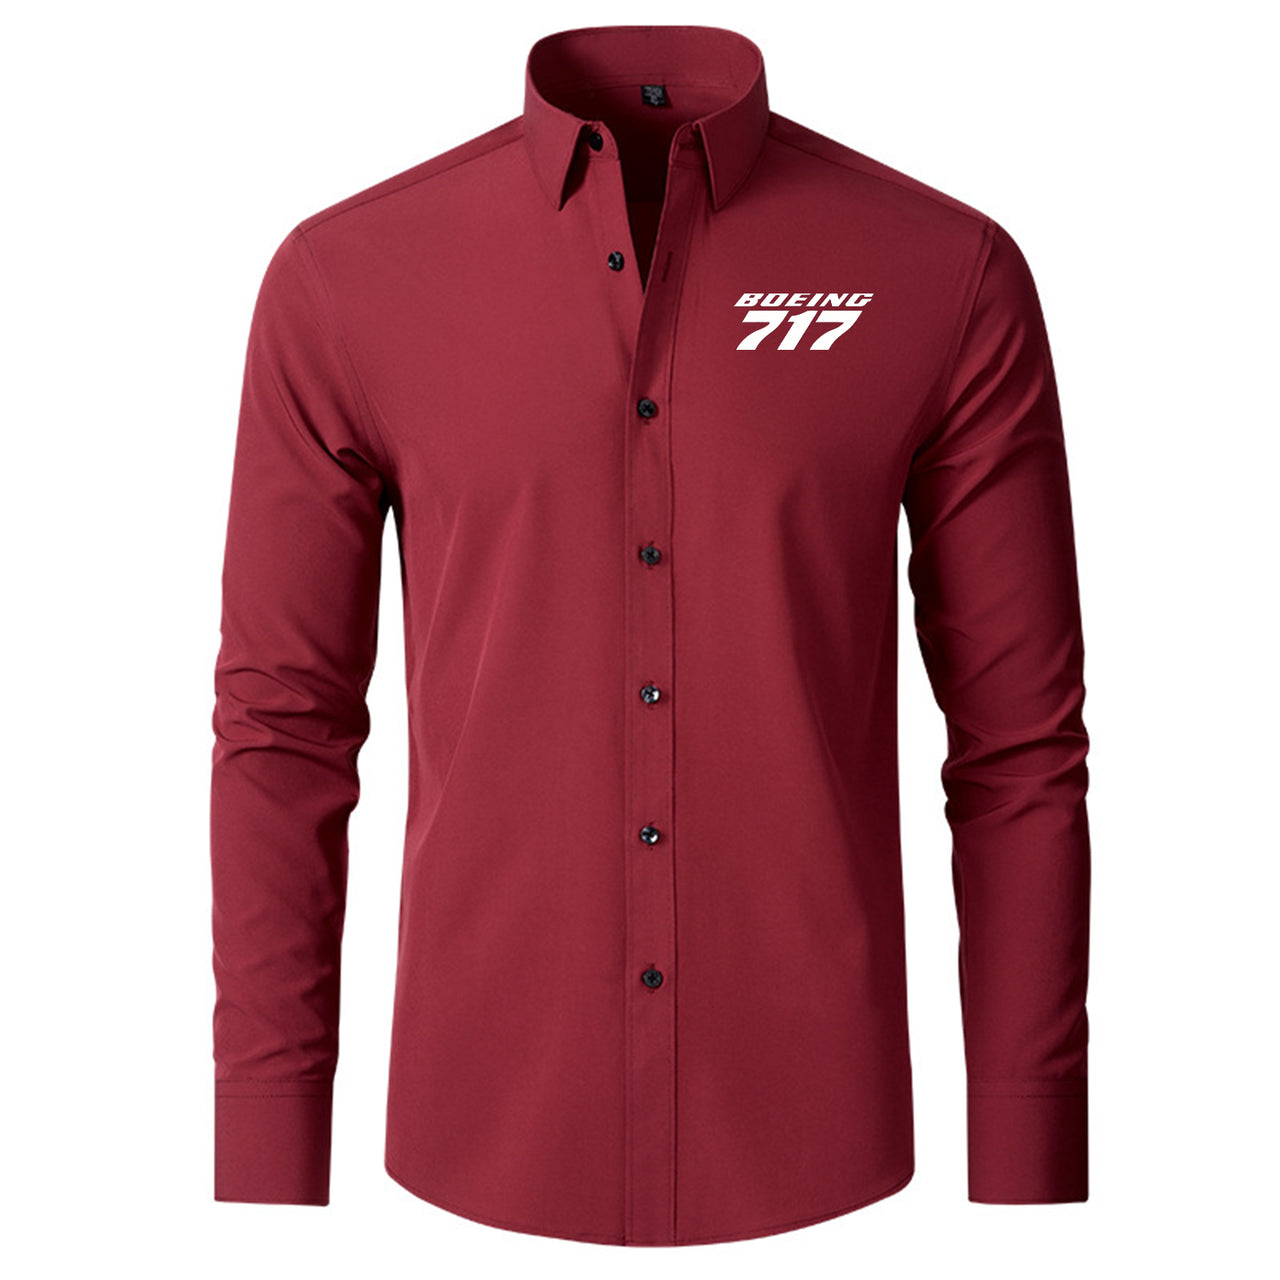 Boeing 717 & Text Designed Long Sleeve Shirts